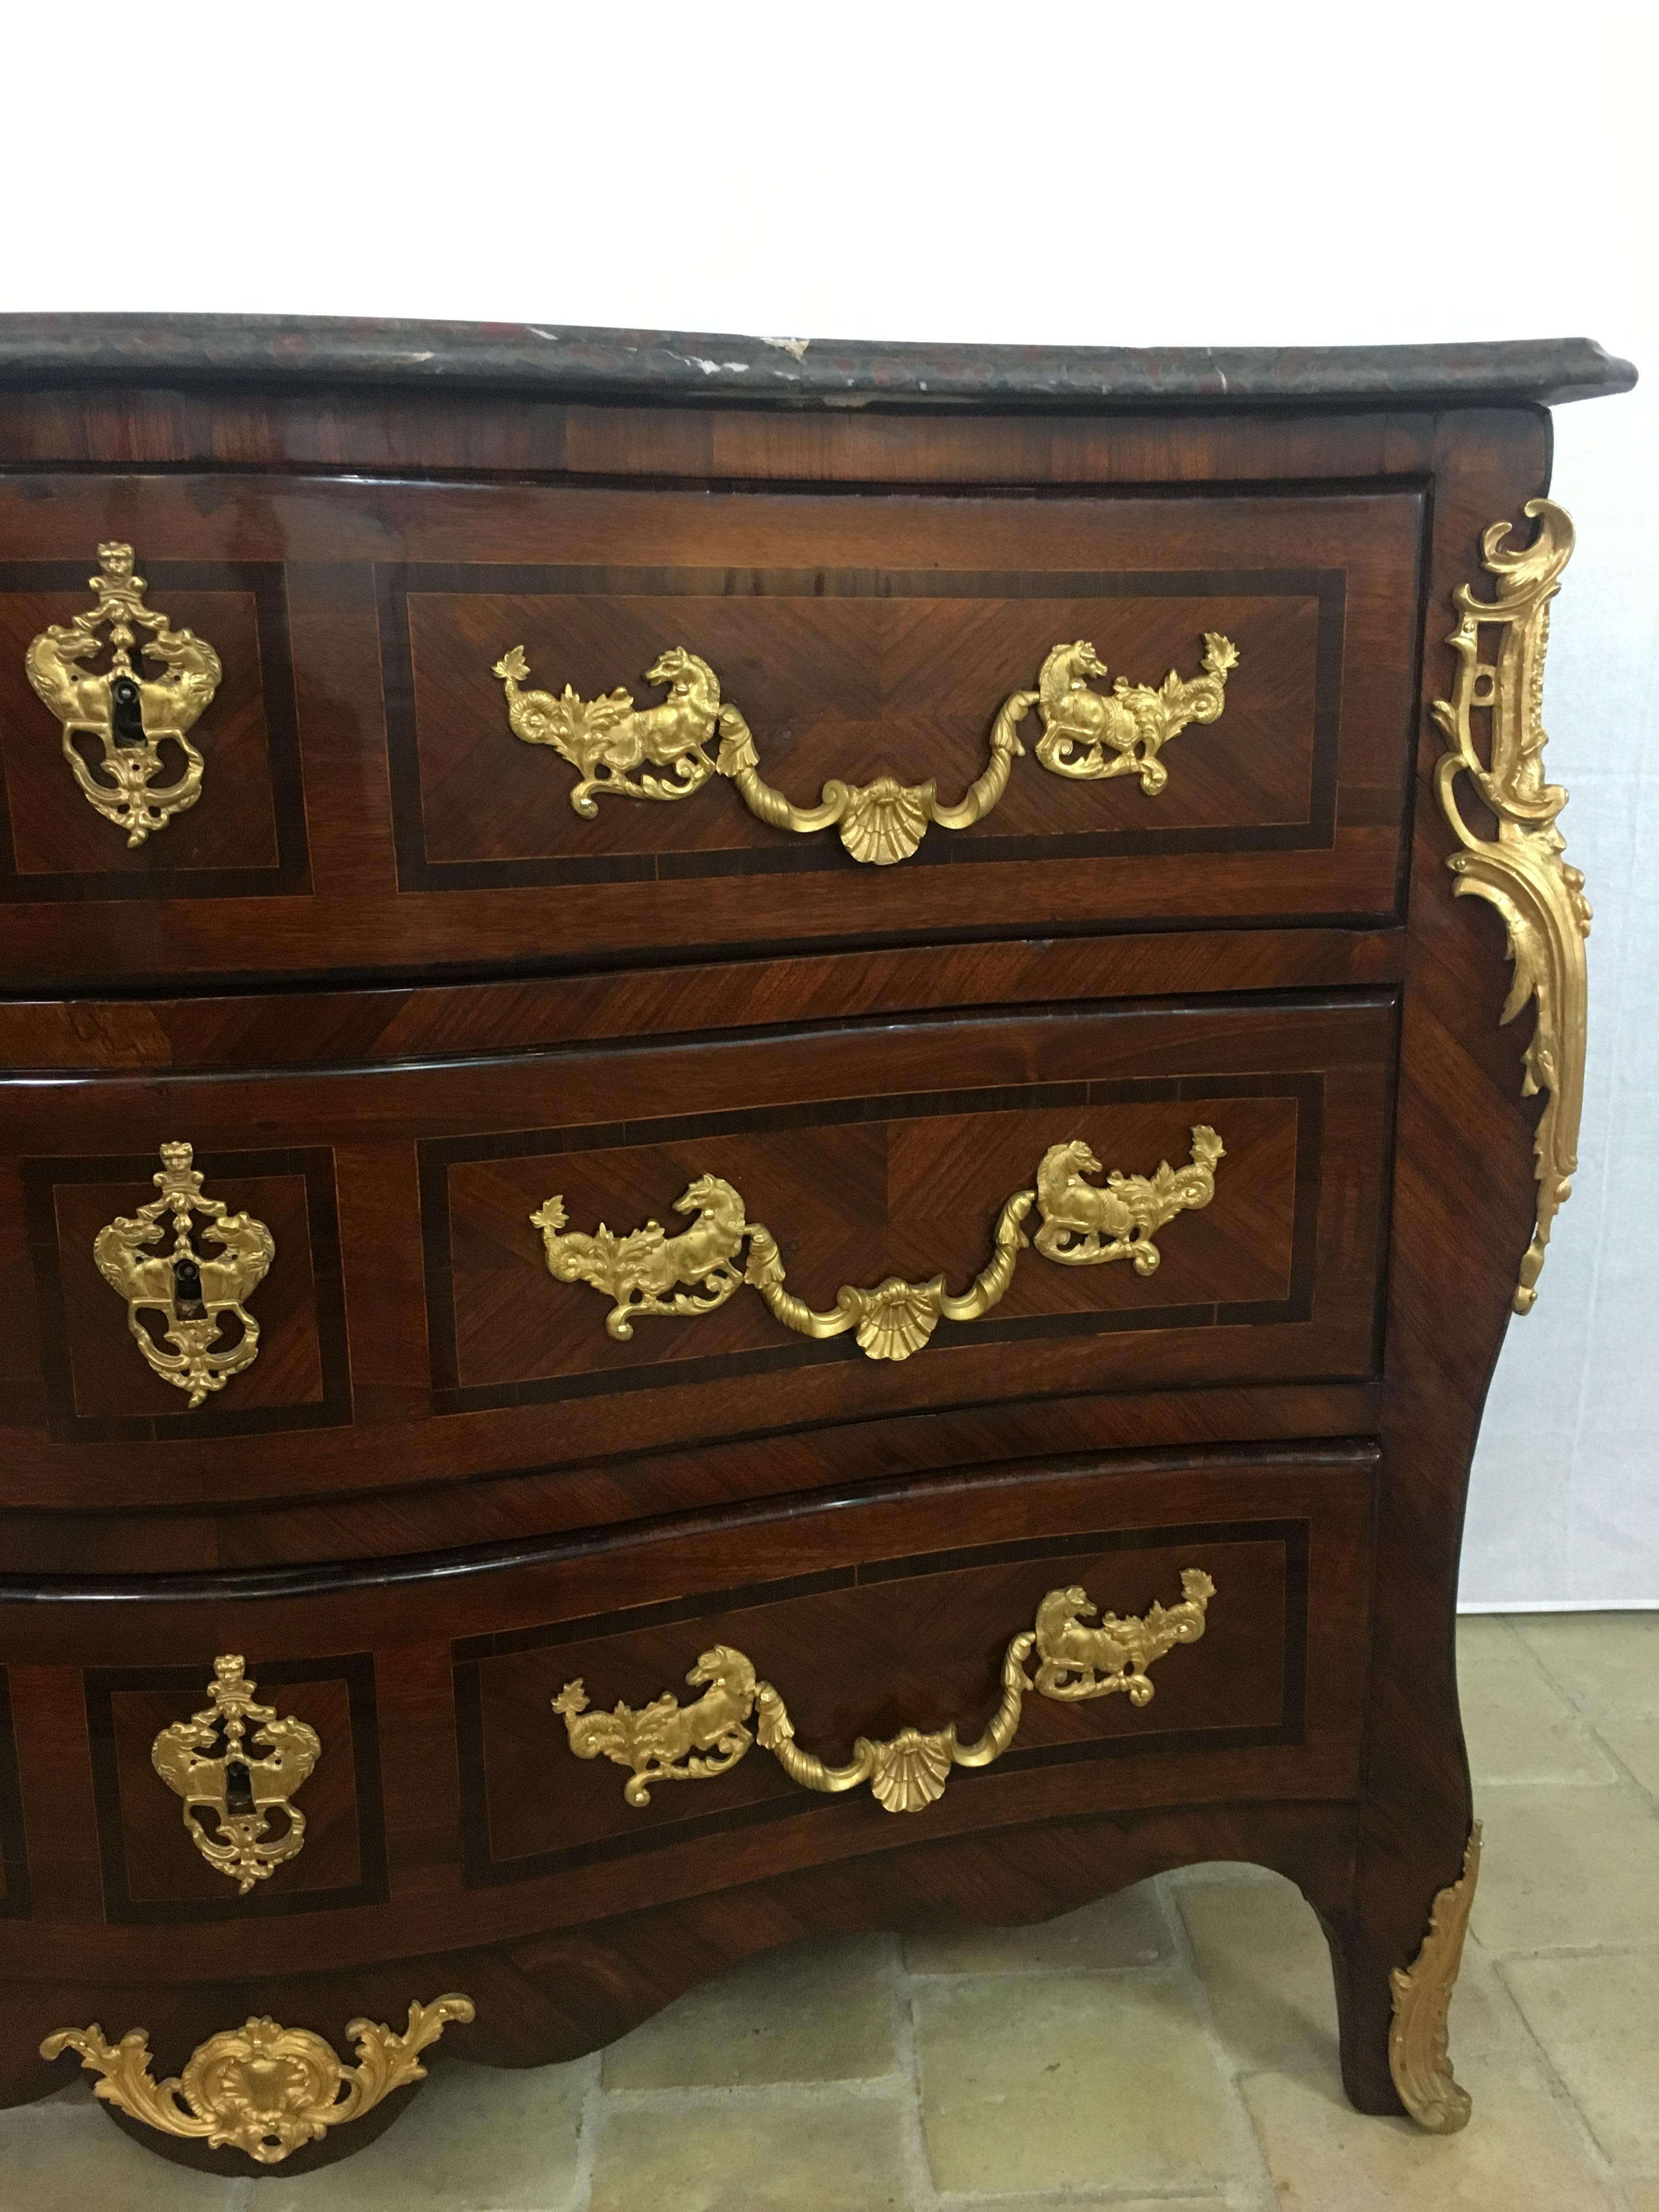 Hand-Crafted 18th Century French Louis XV Style Bombe Commode with Ormolu Bronze Mounts For Sale